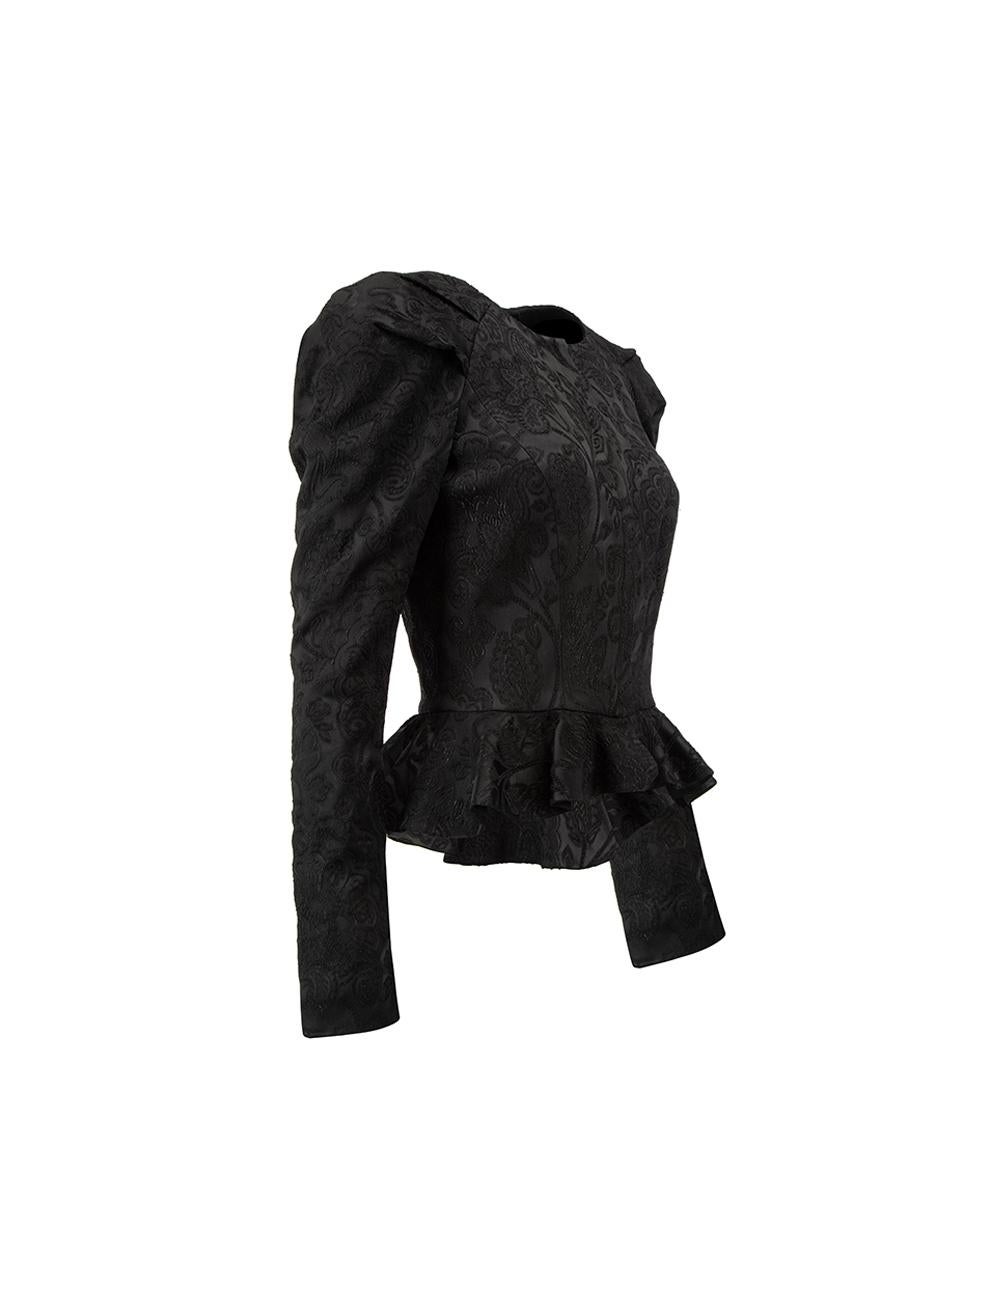 CONDITION is Very good. Minimal wear to jacket is evident. Minimal wear to the right sleeve below the shoulder where the weave of jacquard has been pulled on this used Temperley London designer resale item.



Details


Black

Jacquard

Evening